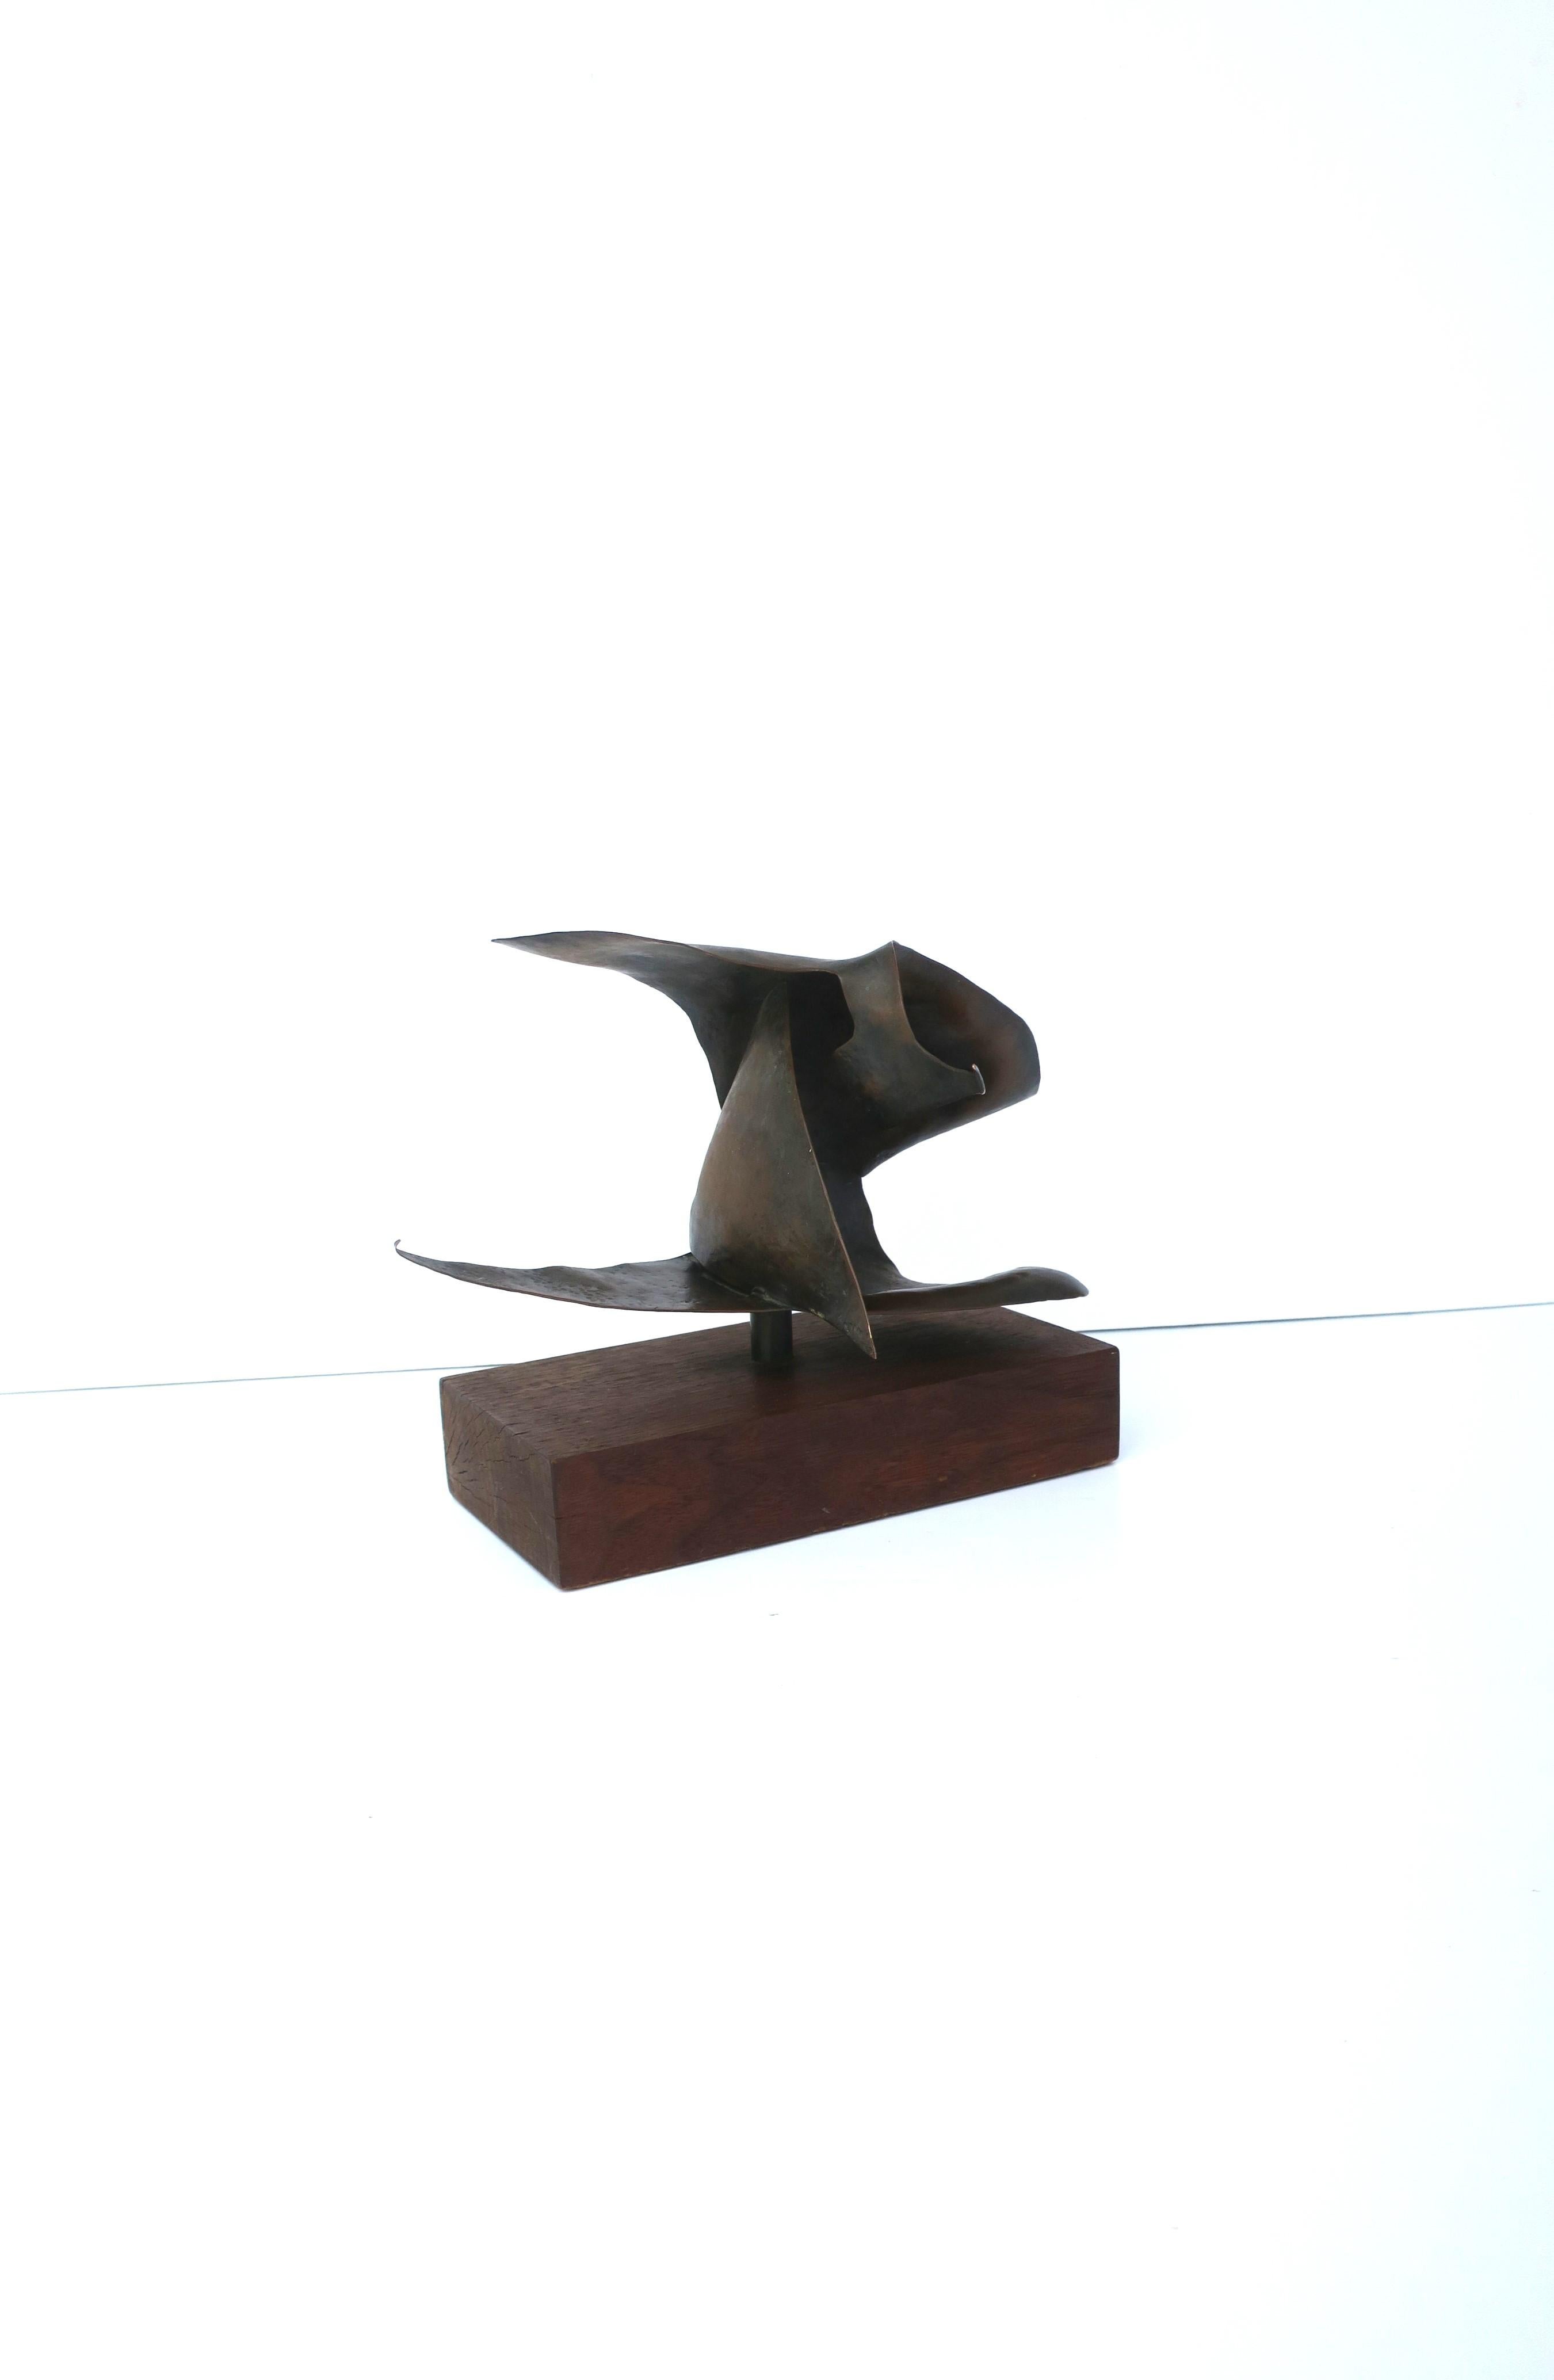 Abstract Bronzed Copper Sculpture, circa 1960s For Sale 3